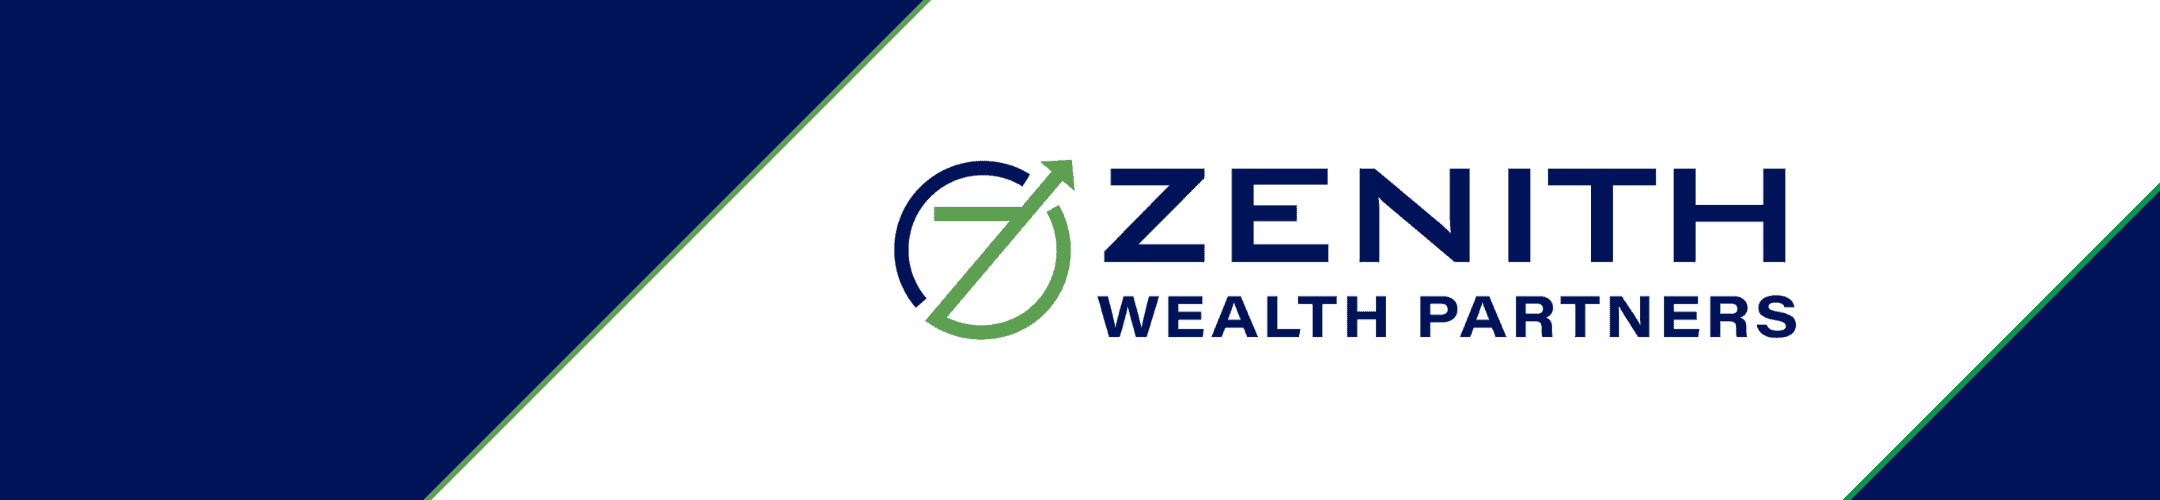 Logo of zenith wealth partners on a sleek blue and white background.